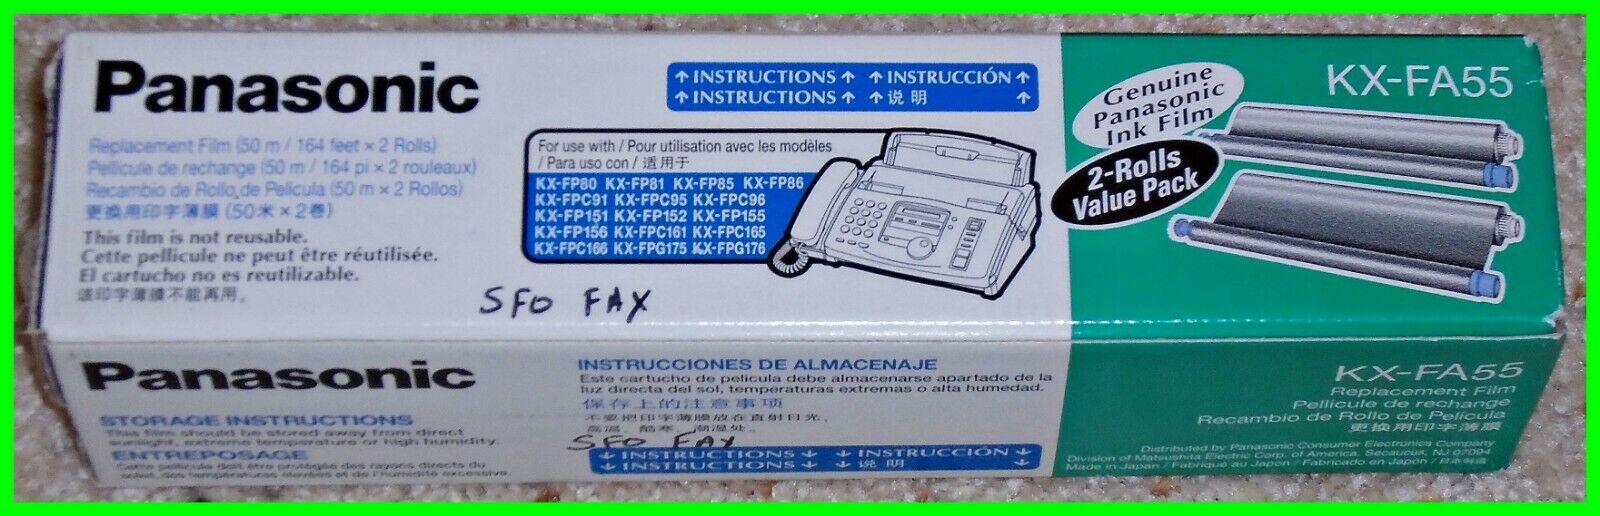 Panasonic KX-FA55 Replacement Film 2 Rolls Value Pack in Open Box KXFA55